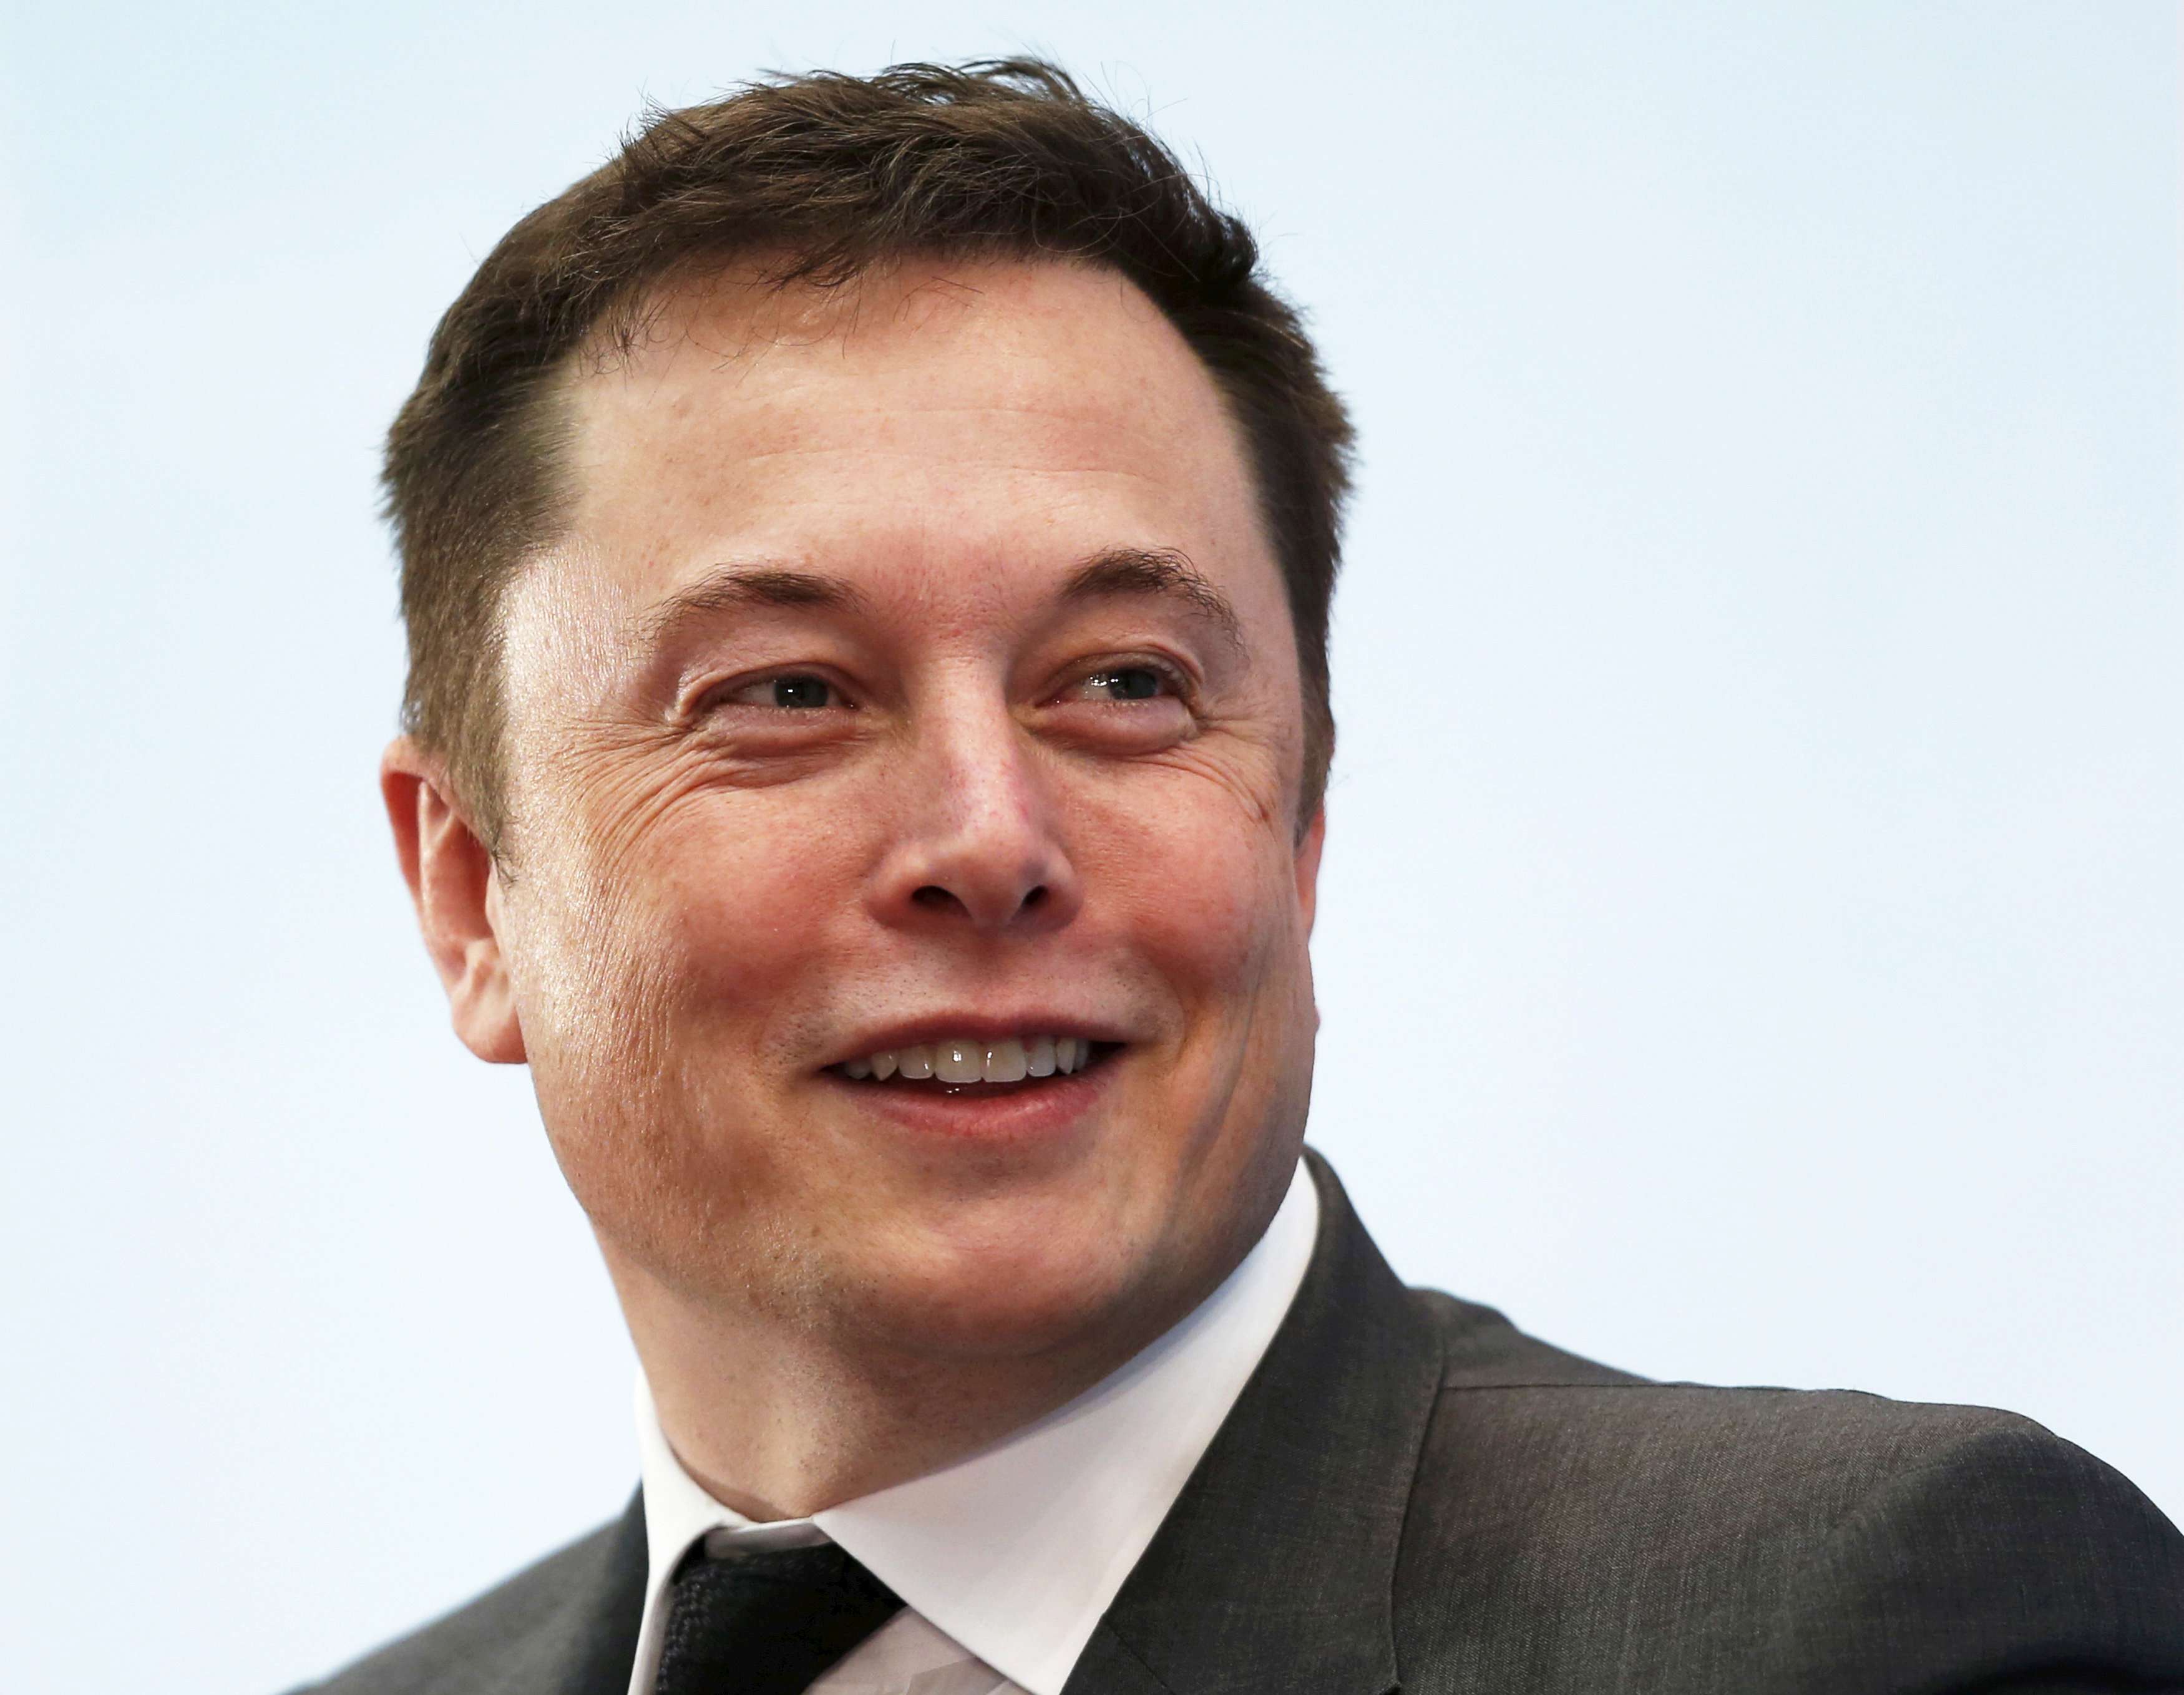 Elon Musk launched another company this week called Neuralink, which aims to implant tiny electrodes in the brain to directly flash data to and from human consciousness. Photo: Reuters